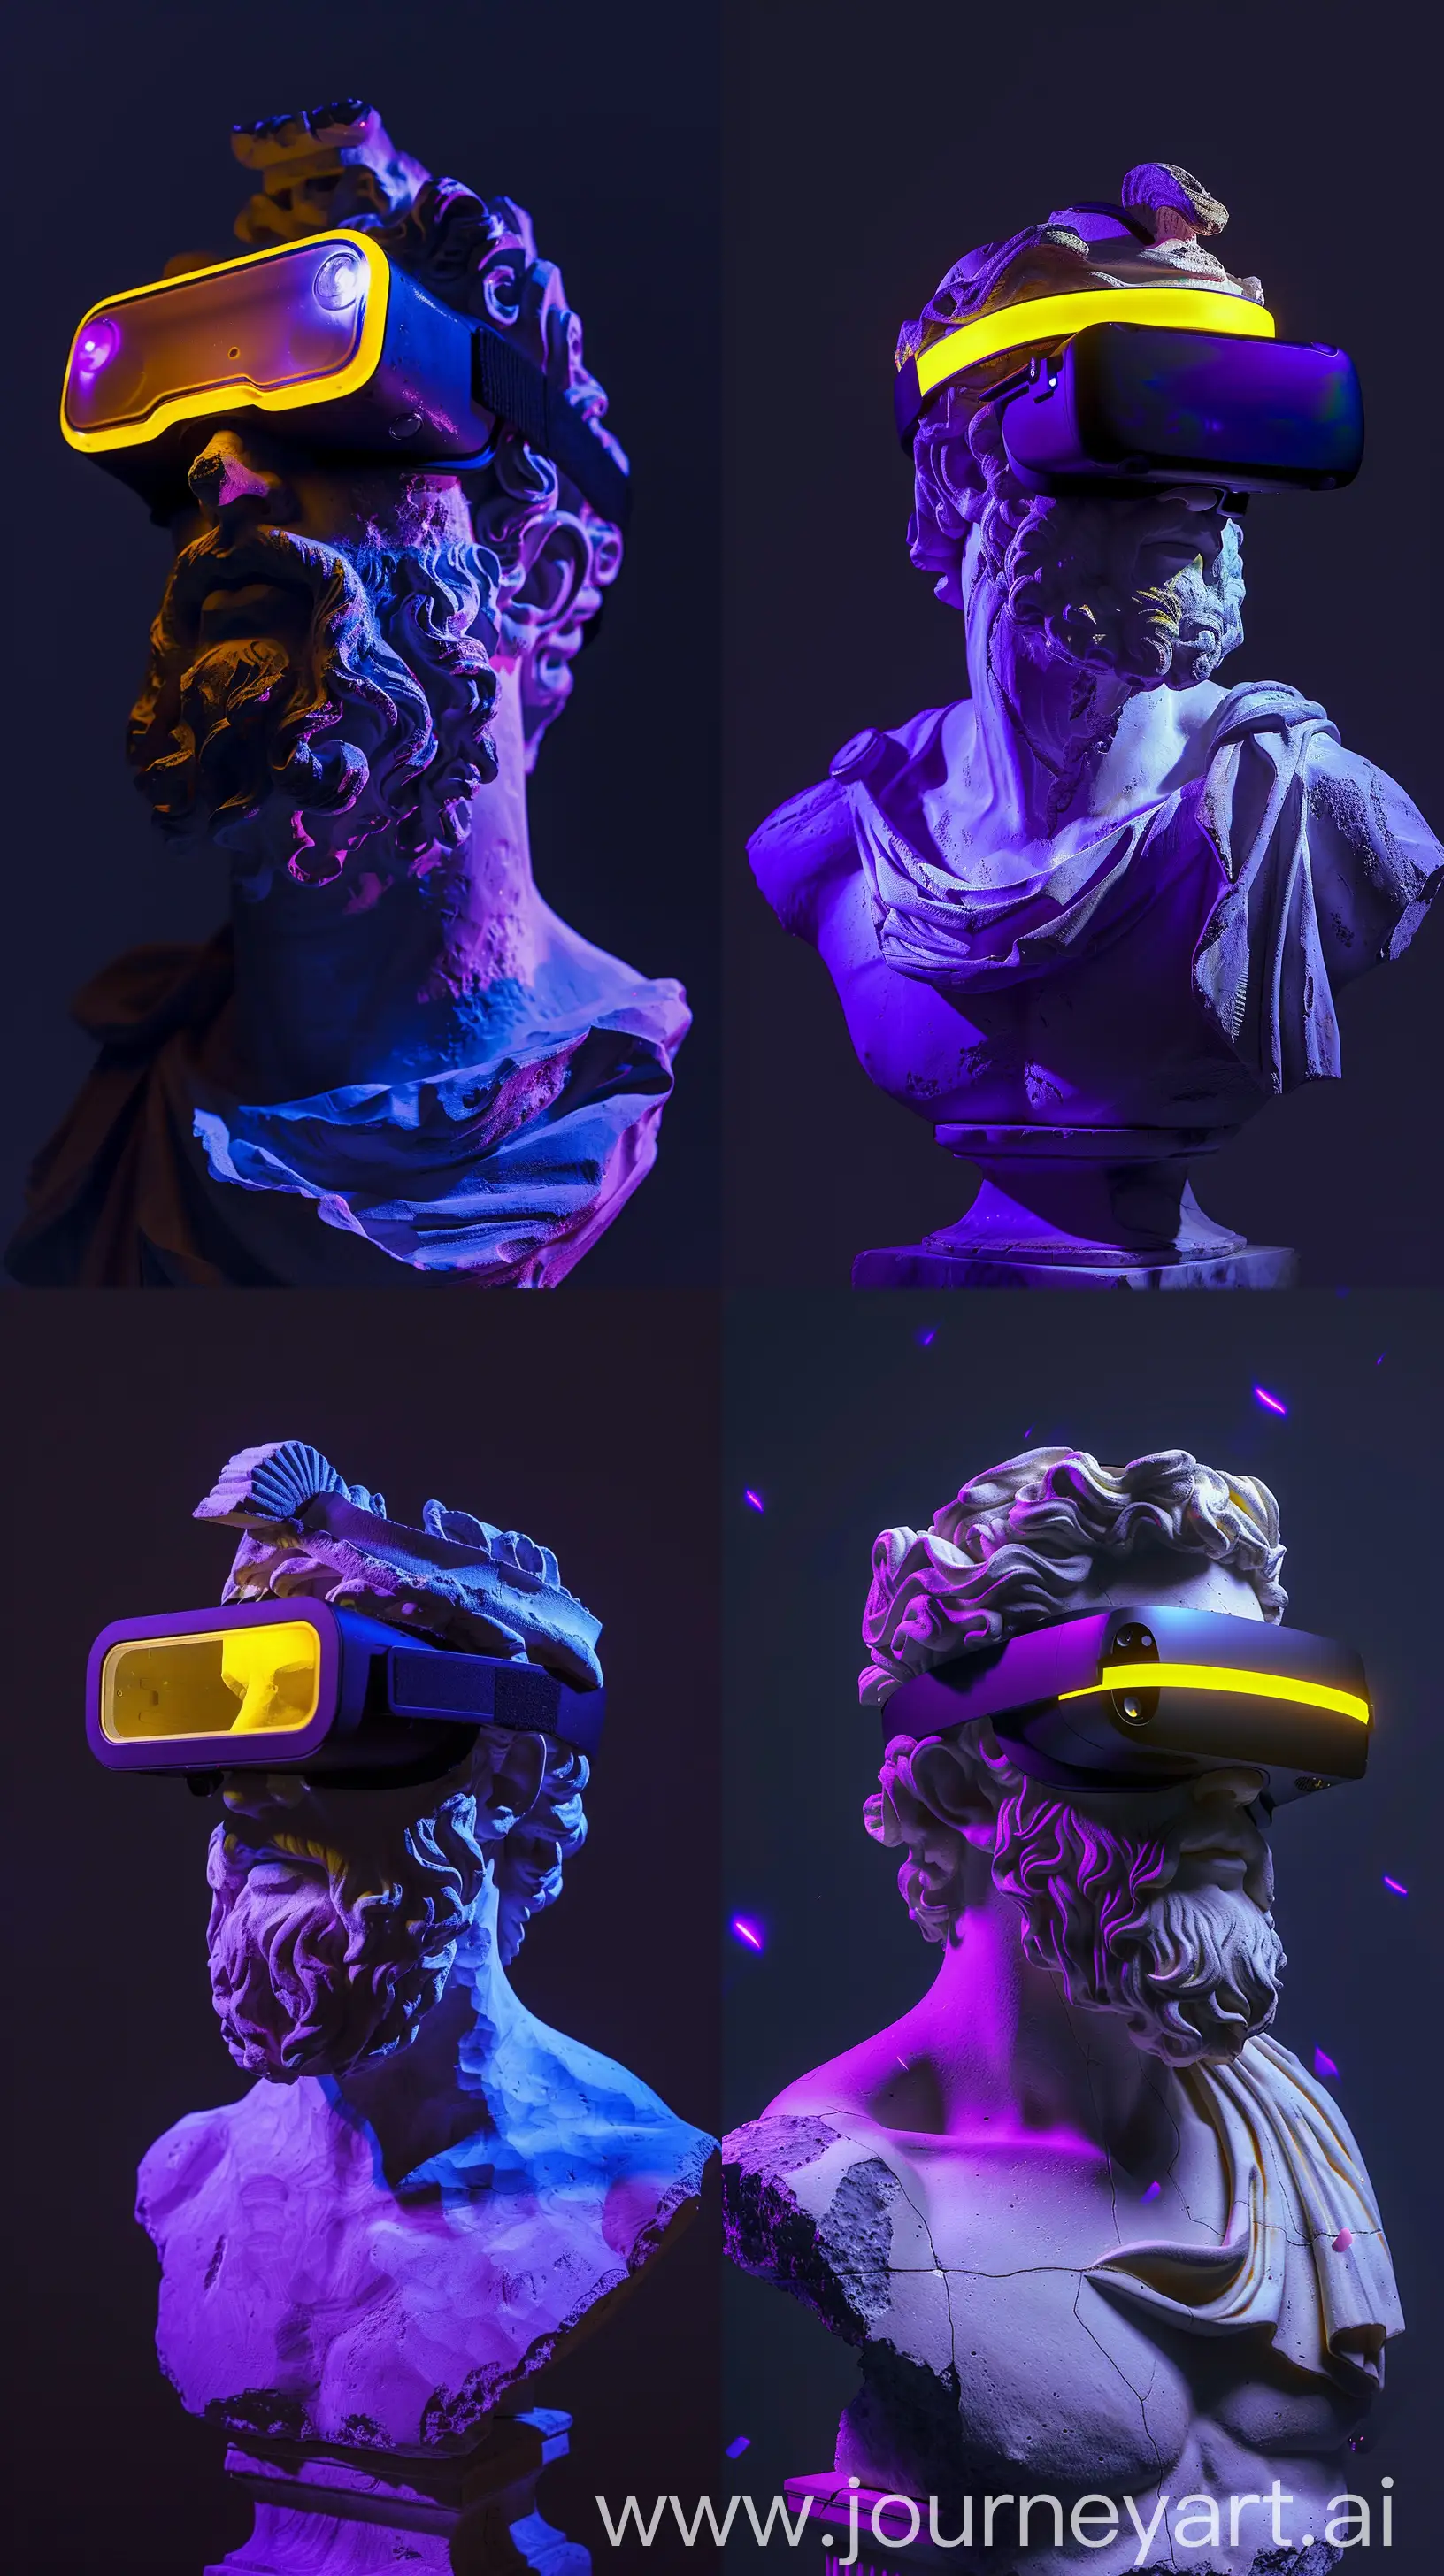 Dreamy-Pose-of-Zeus-Plaster-Sculpture-with-Black-VR-Glasses-and-Purple-Light-Reflections